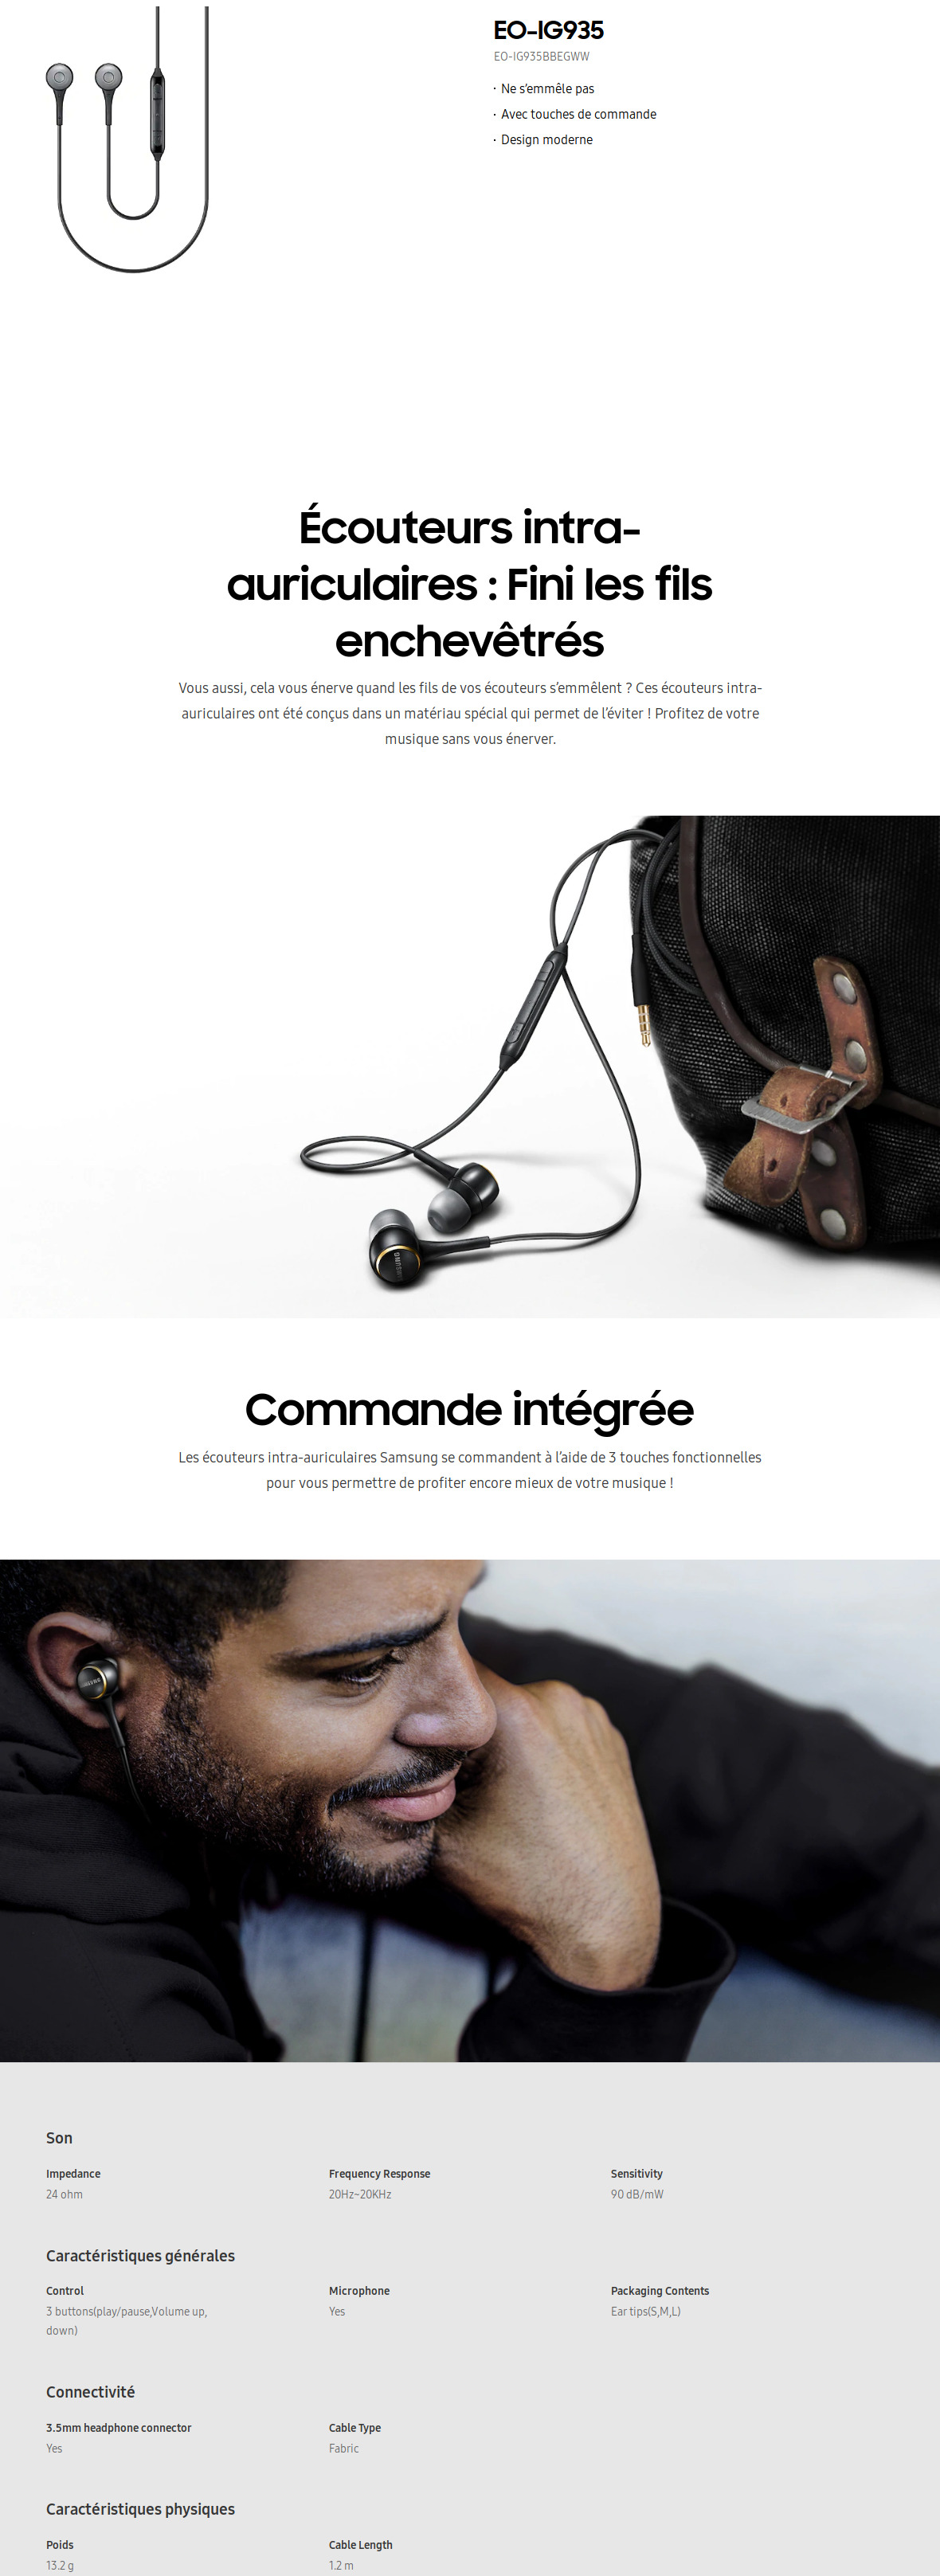 9663-ecouteurs-samsung-intra-auriculaires-ig935